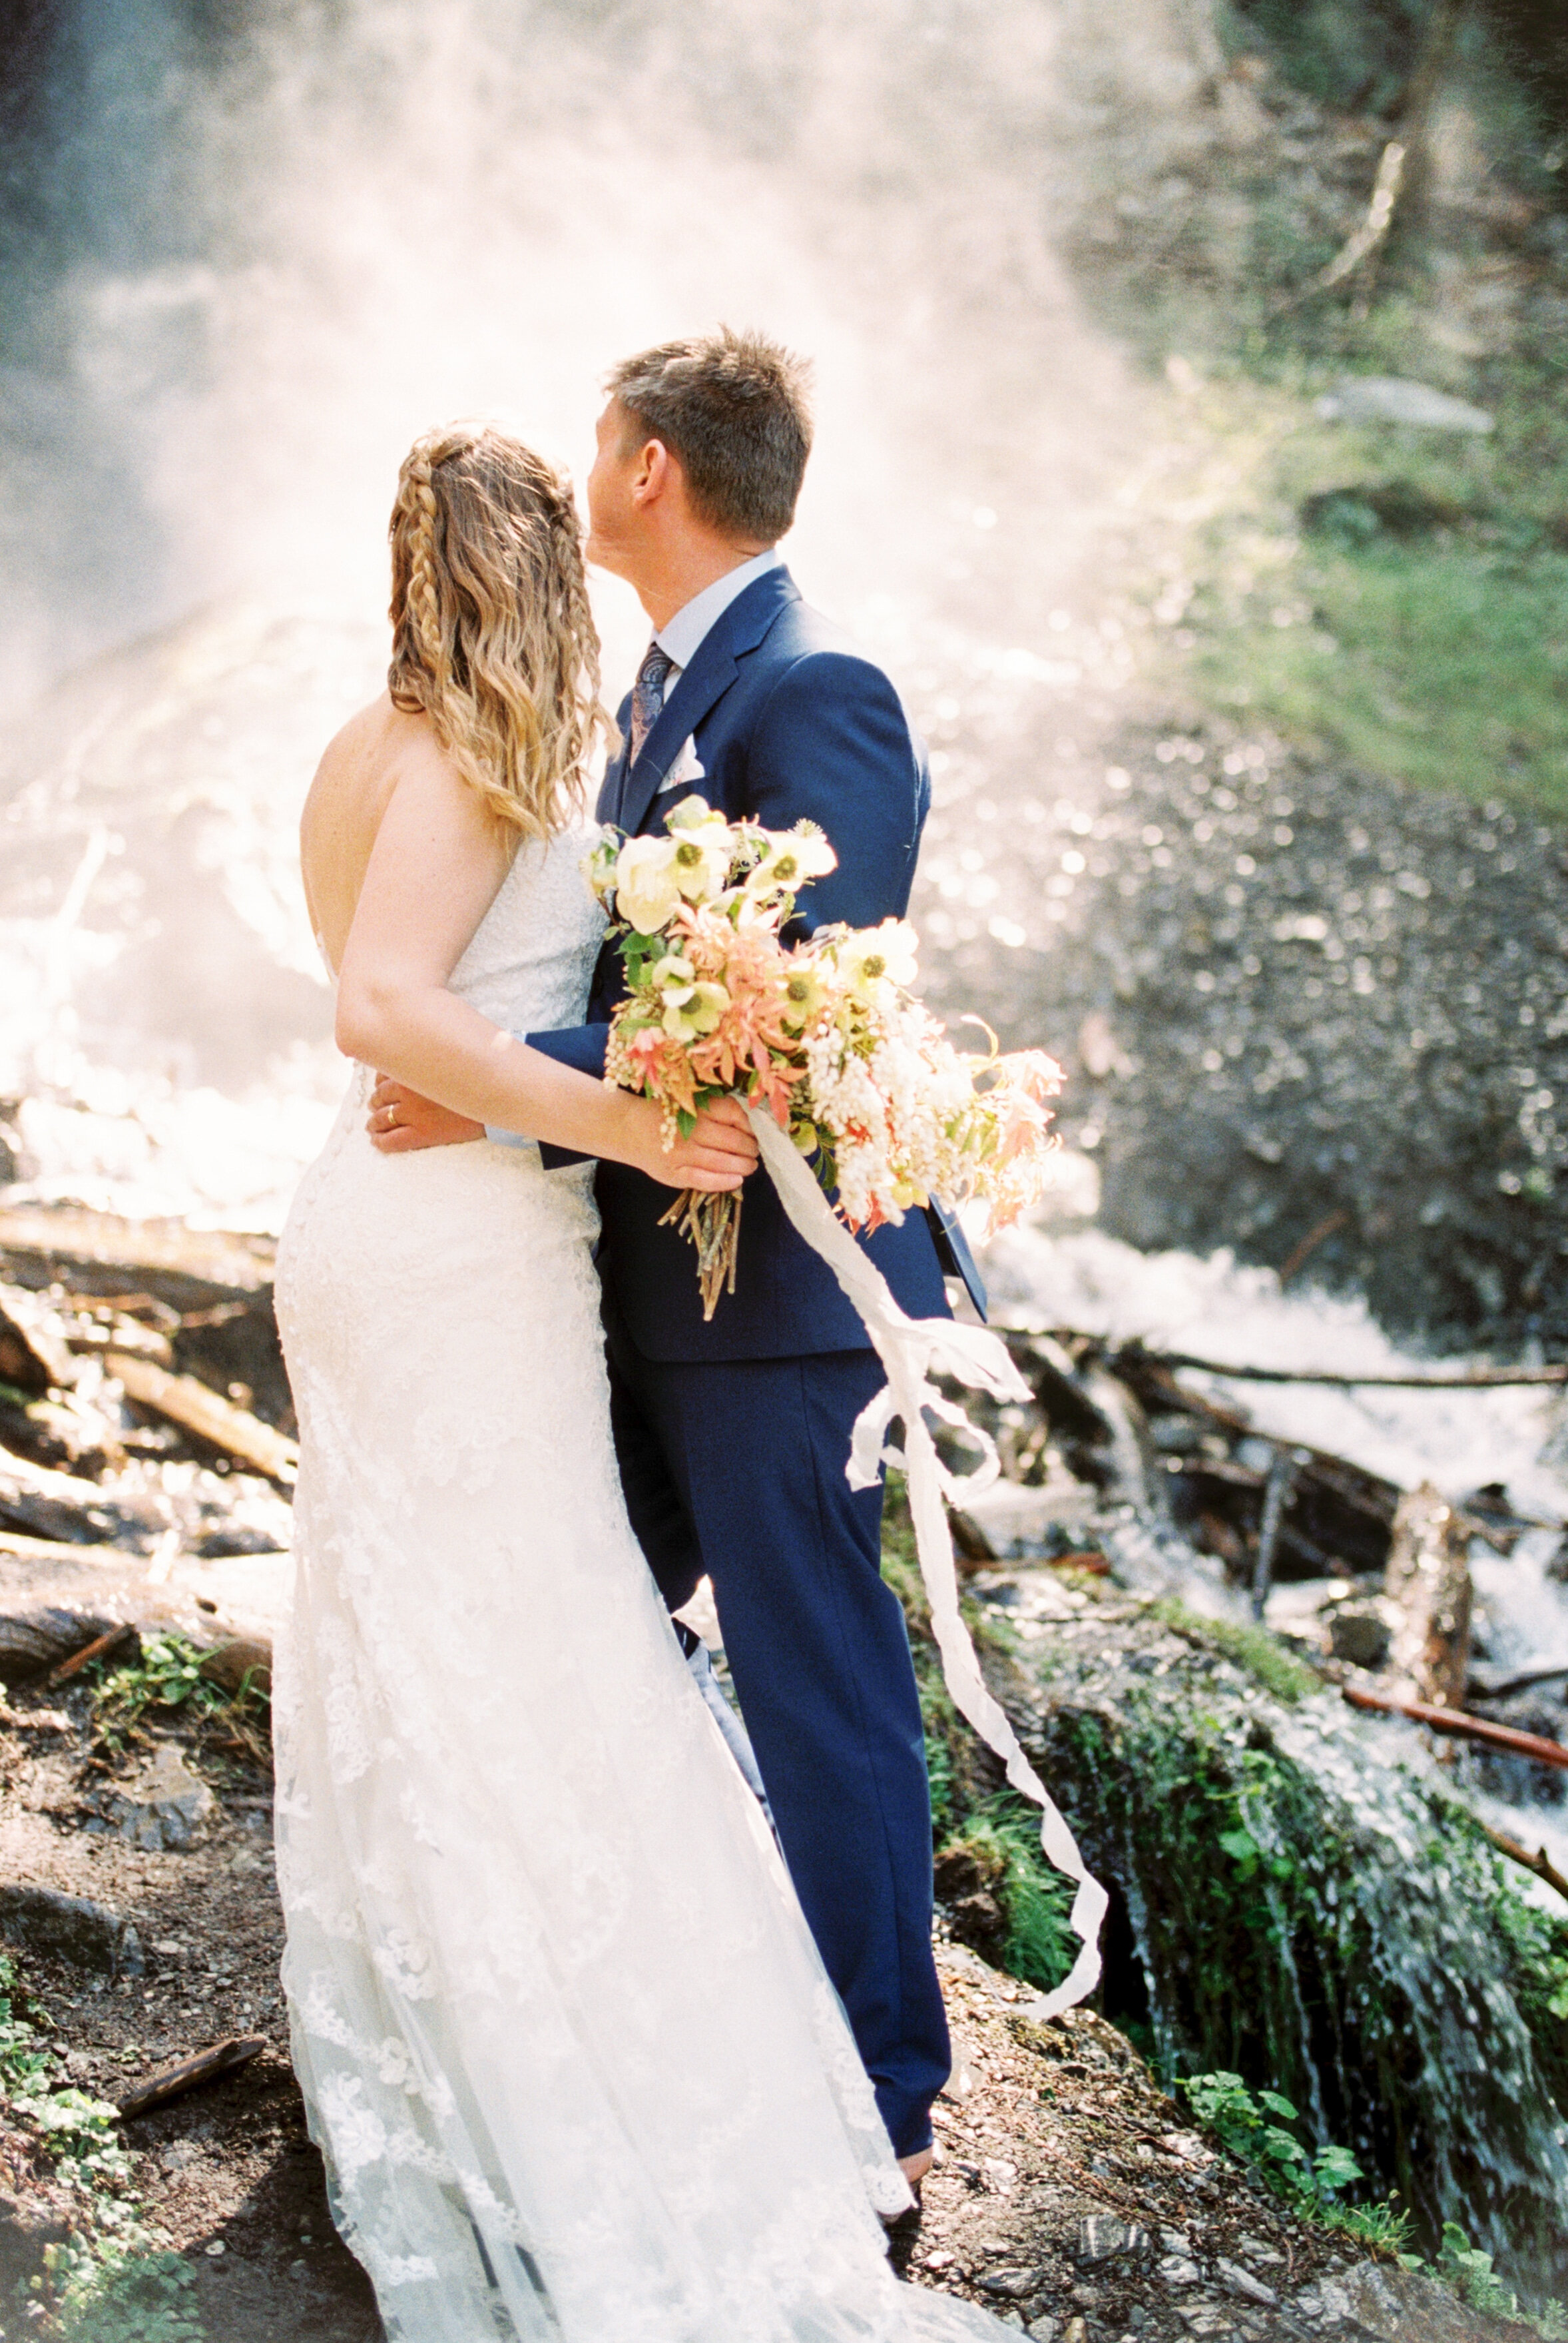 Stunning Elopement-style wedding Featuring Waterfall Kisses & Helicopter Adventures // Kathryn and Richard - on the Bronte Bride Blog